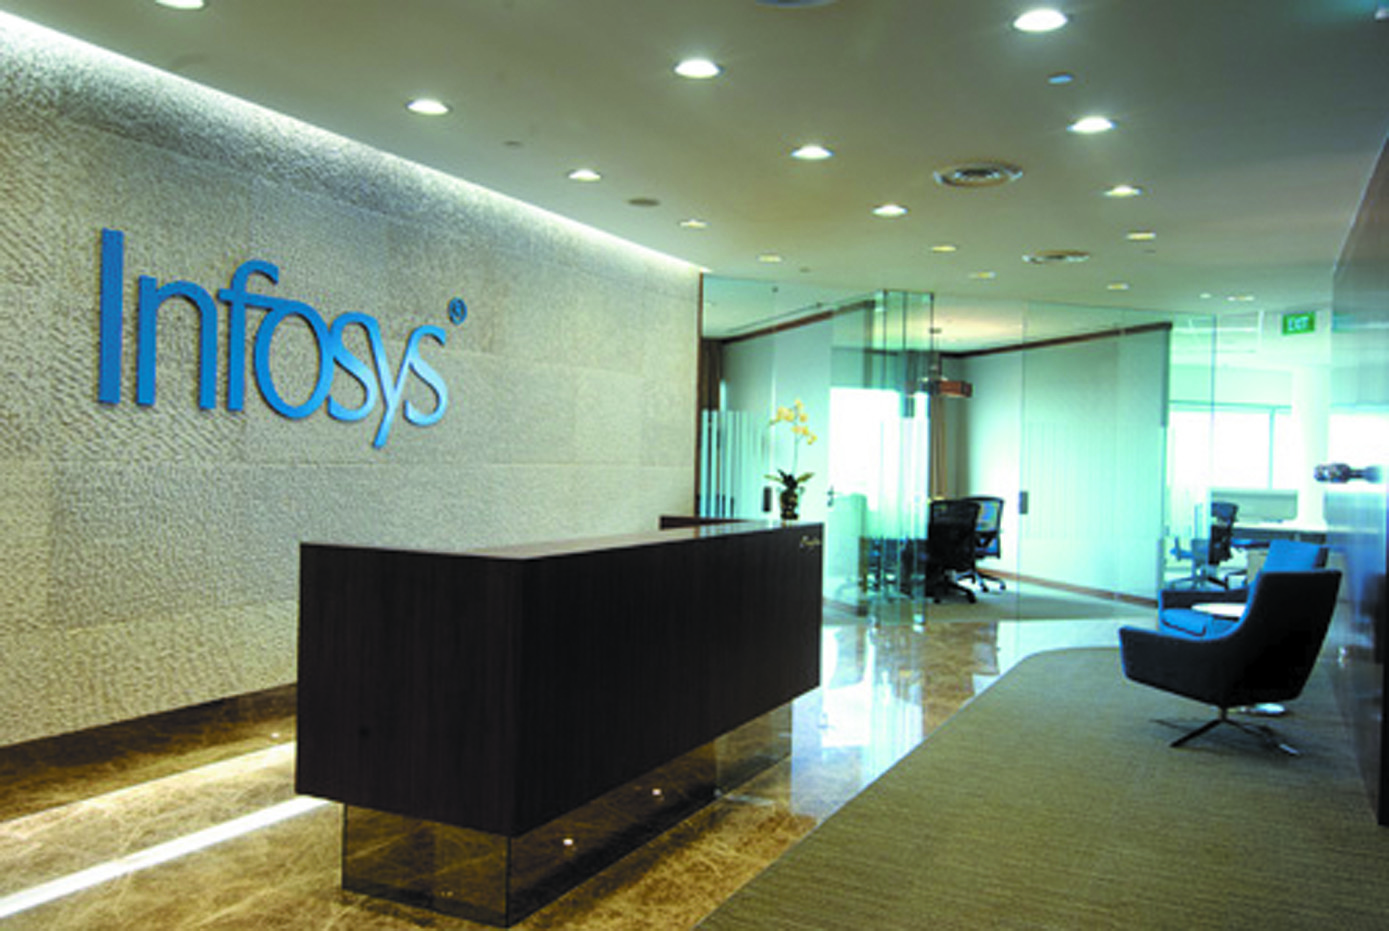 Infosys to create 1,200 jobs in Australia by 2020